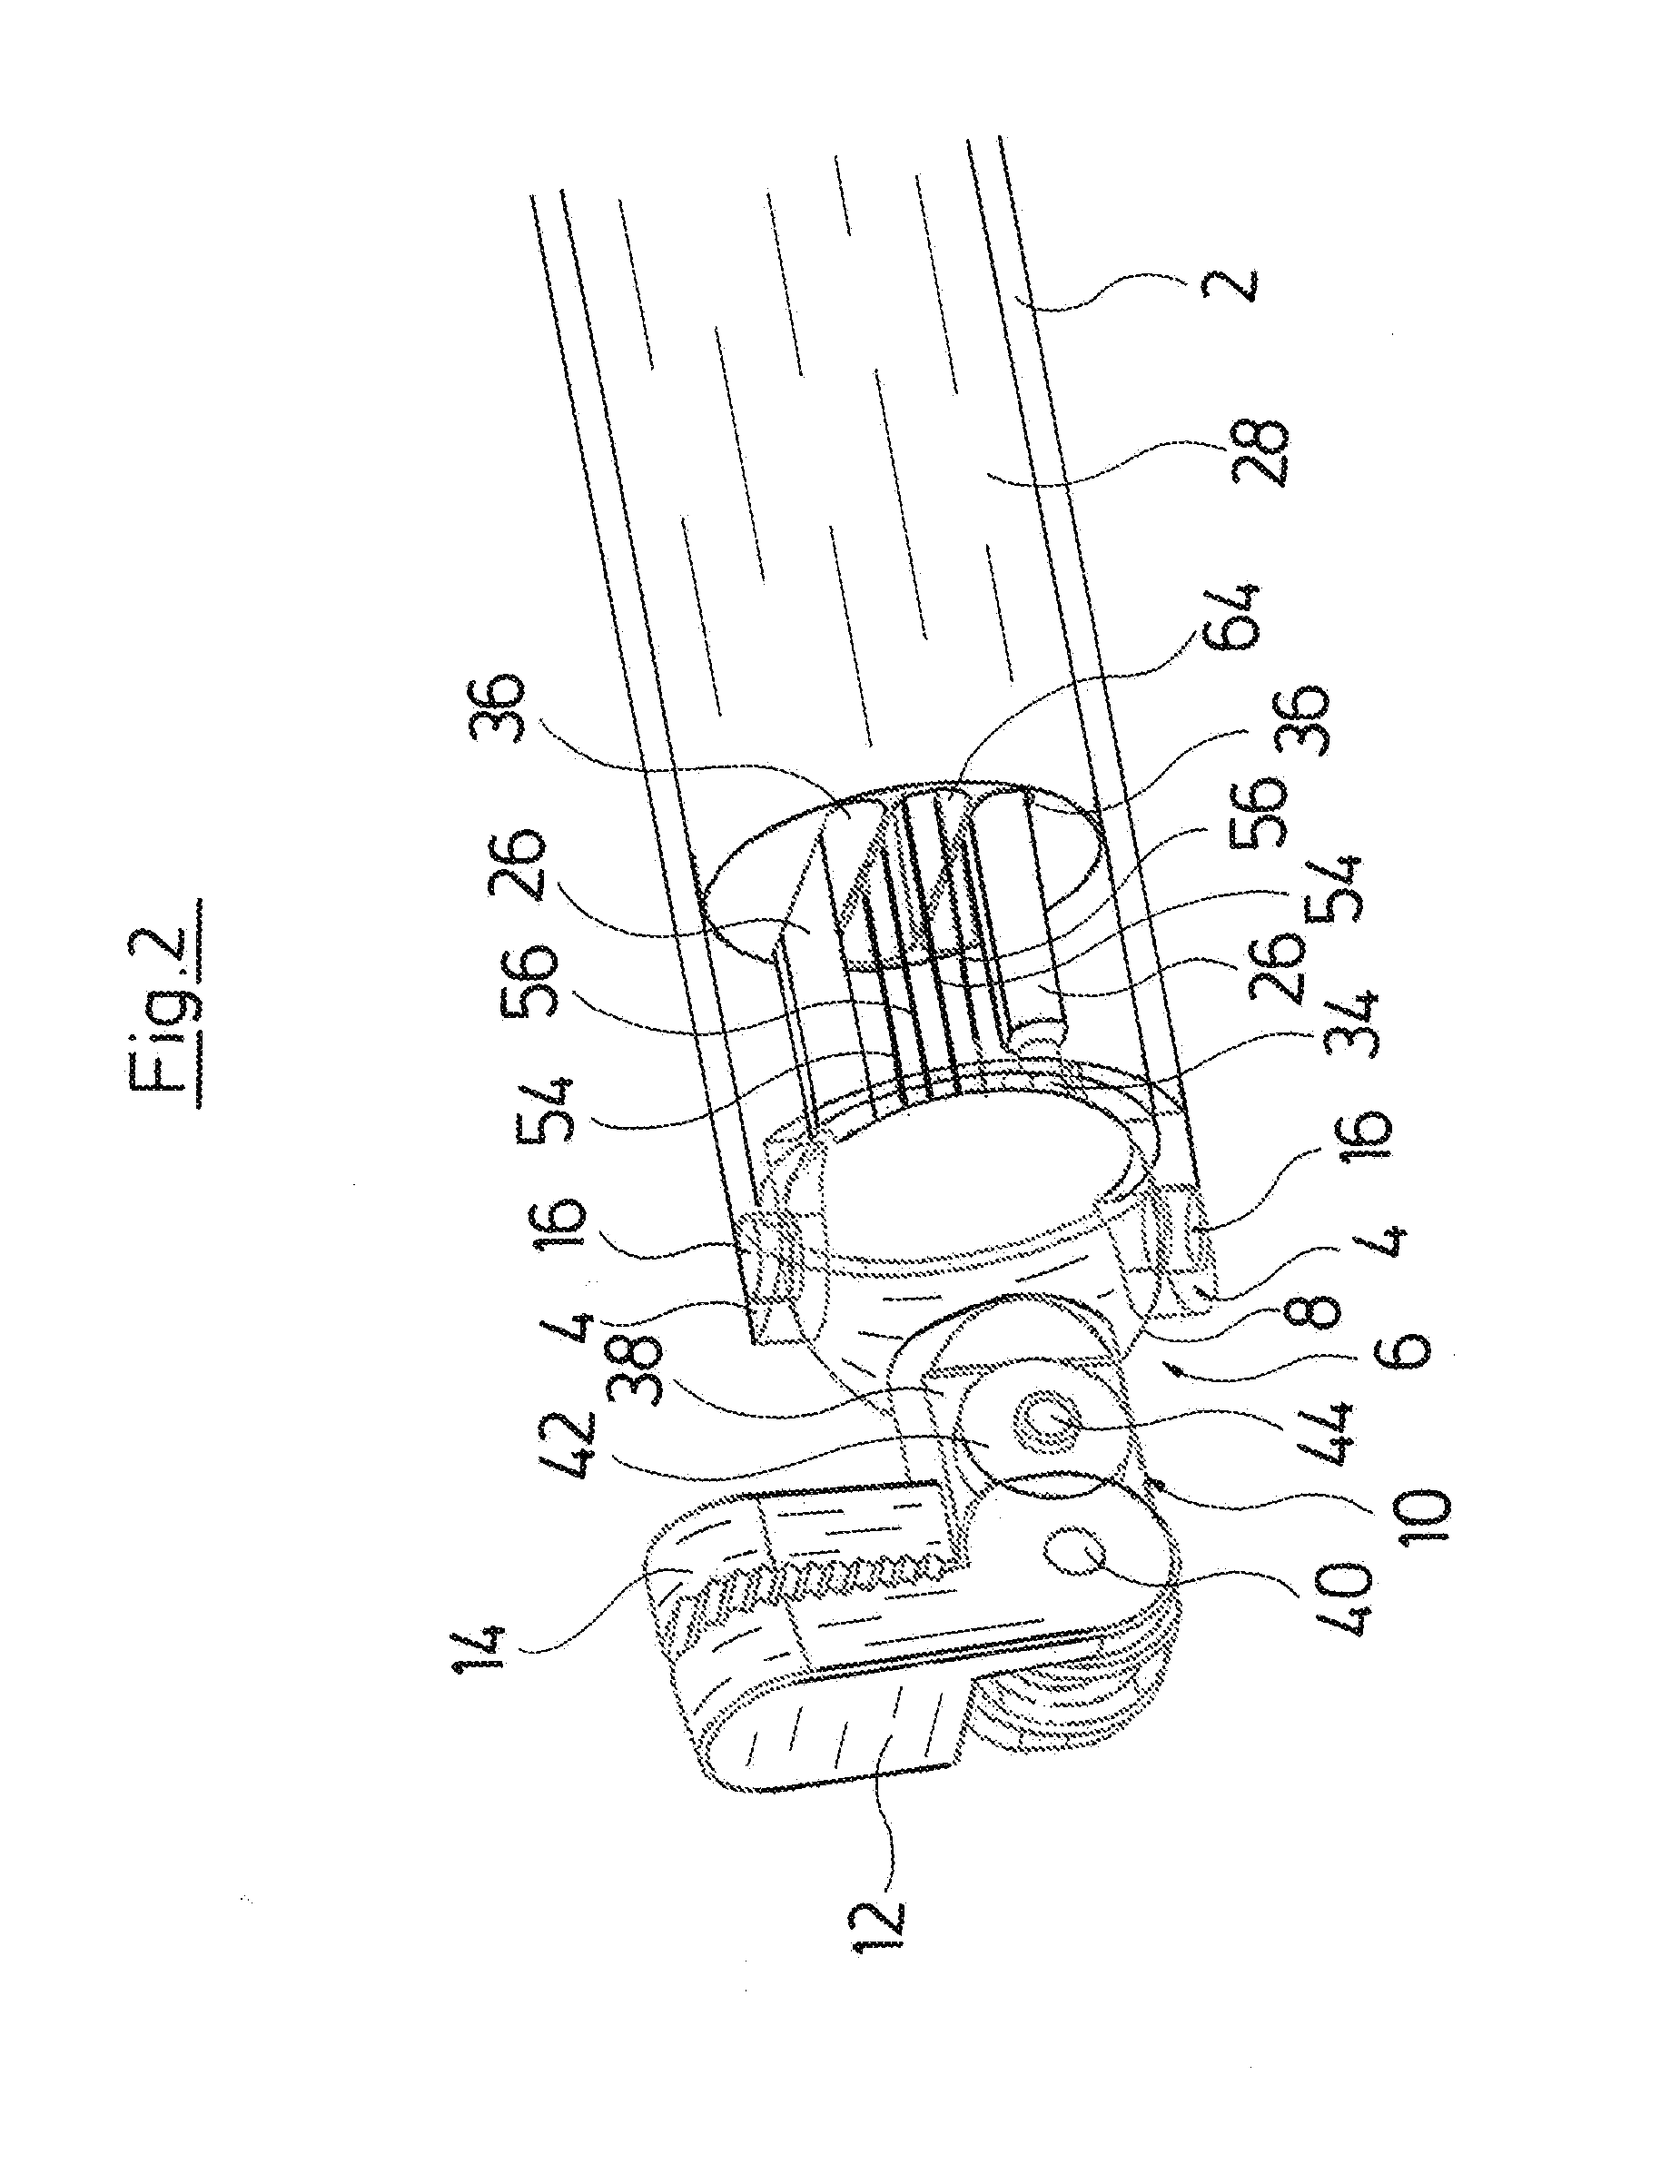 Instrument, in particular medical-endoscopic instrument or technoscope